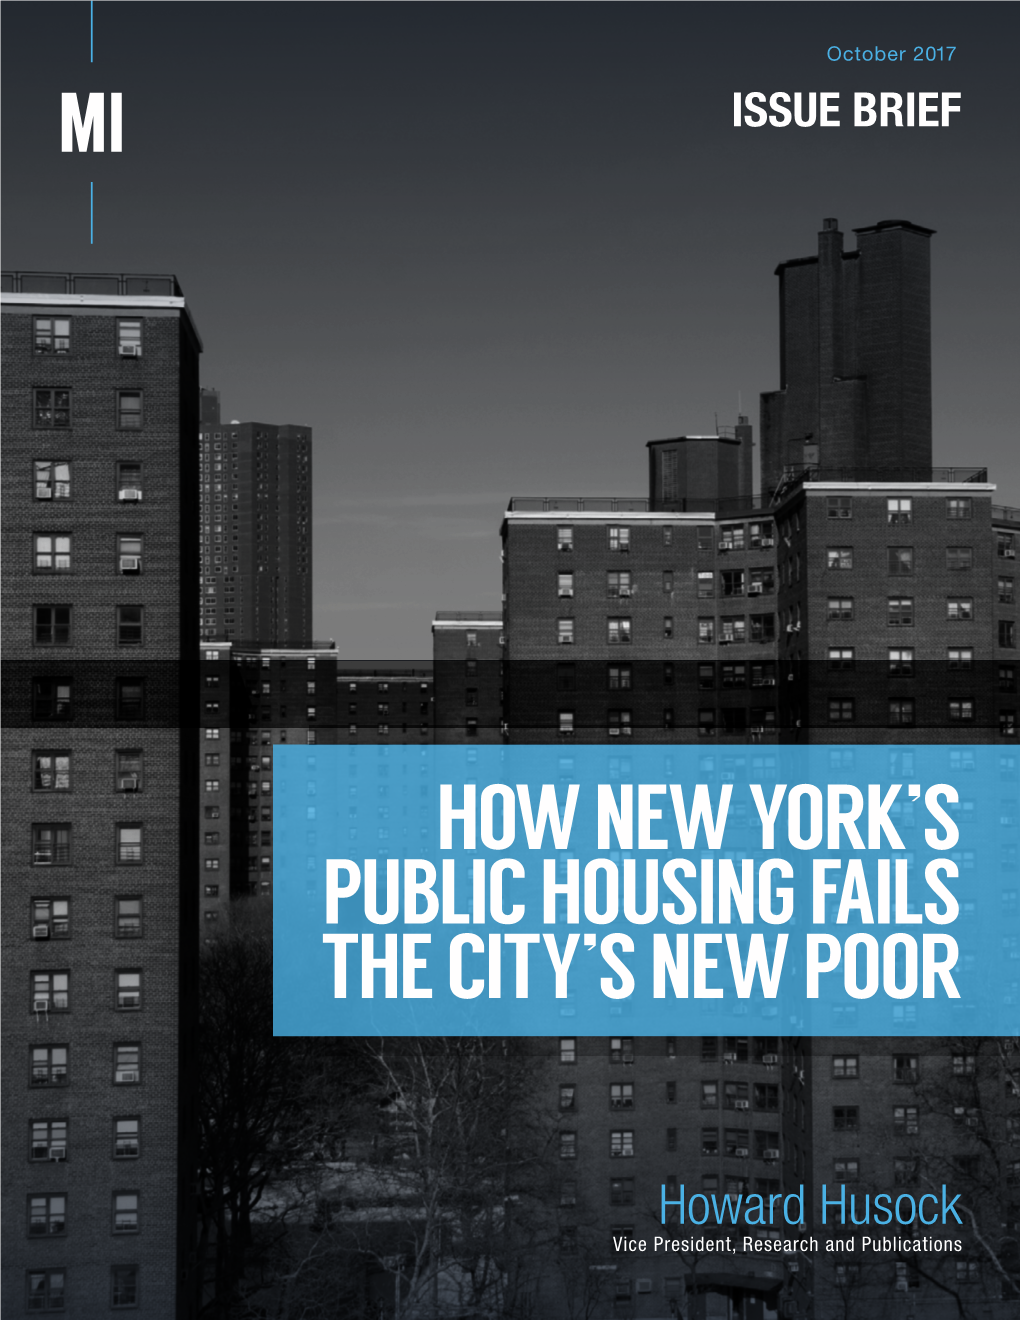 How New York's Public Housing Fails the City's New Poor